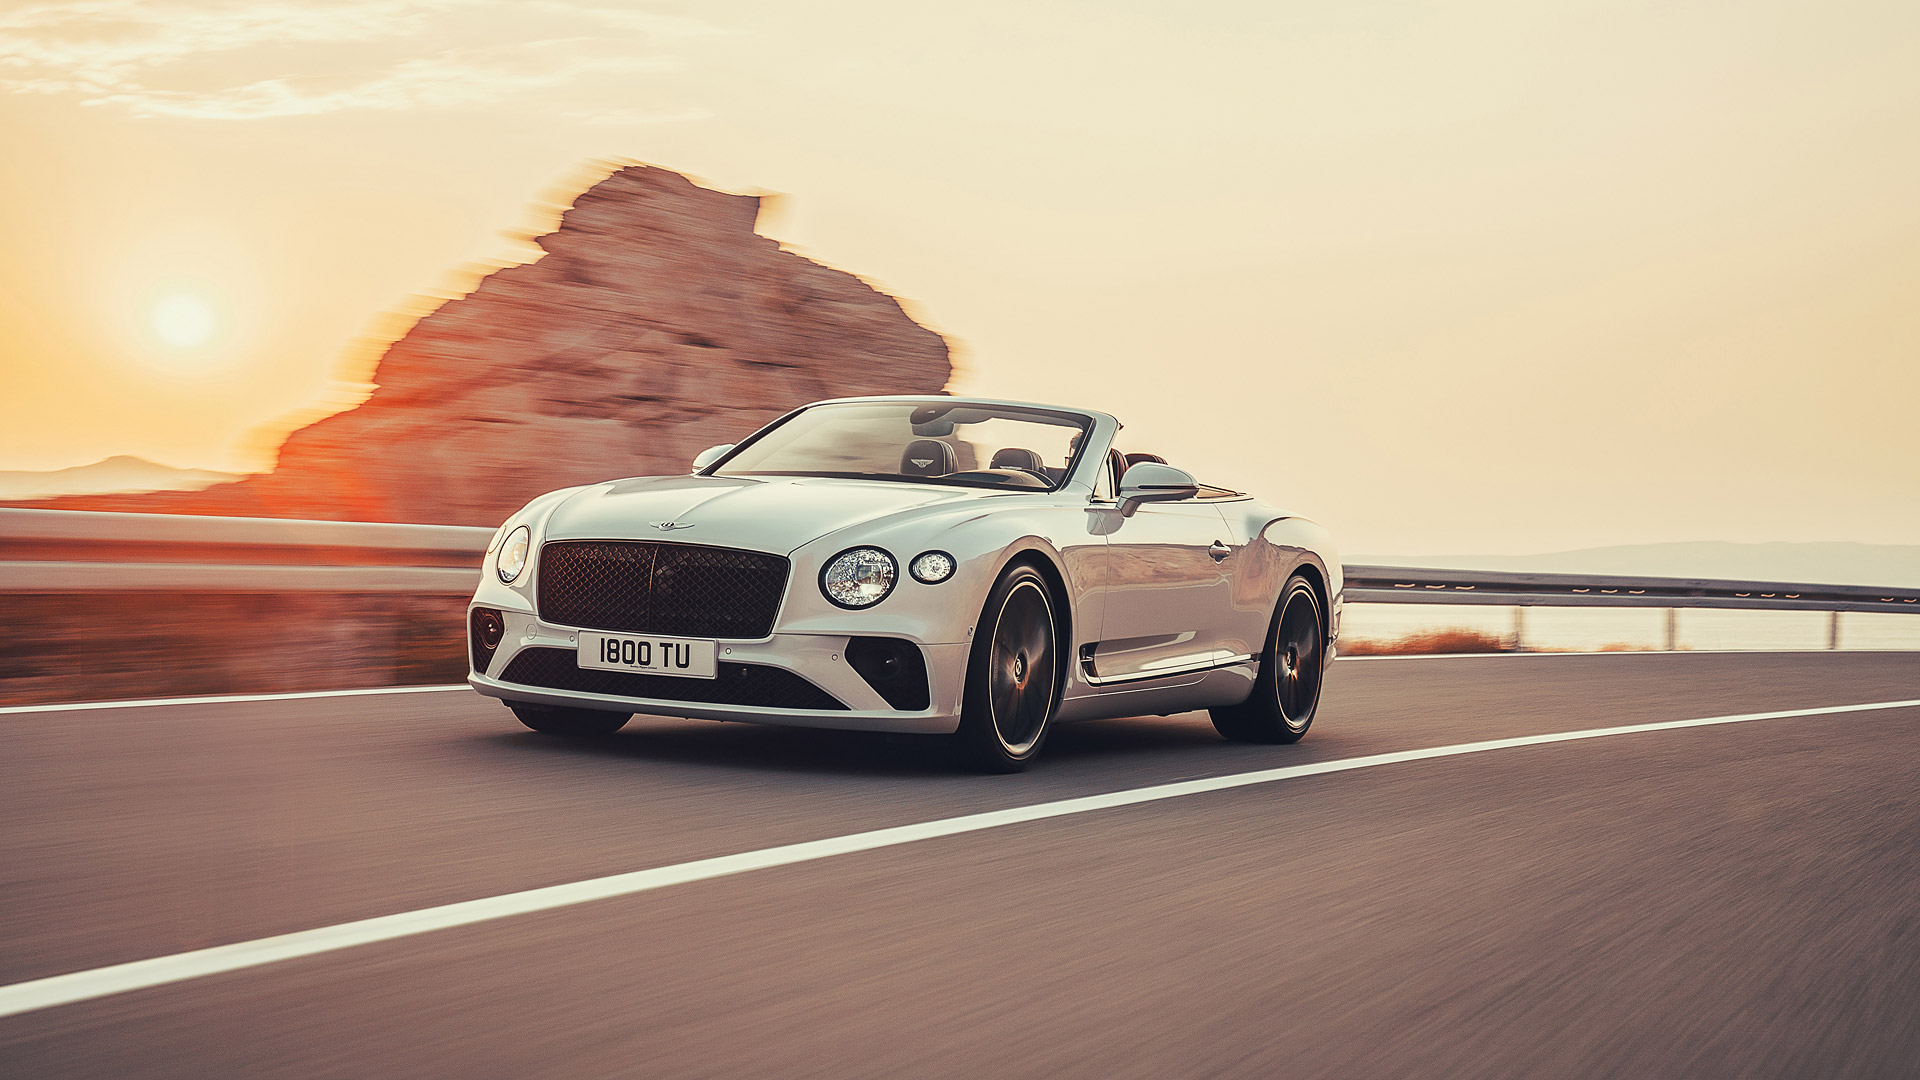 2019 Bentley Continental Gt Convertible Picture - 2020 Bentley Continental Gt Convertible , HD Wallpaper & Backgrounds